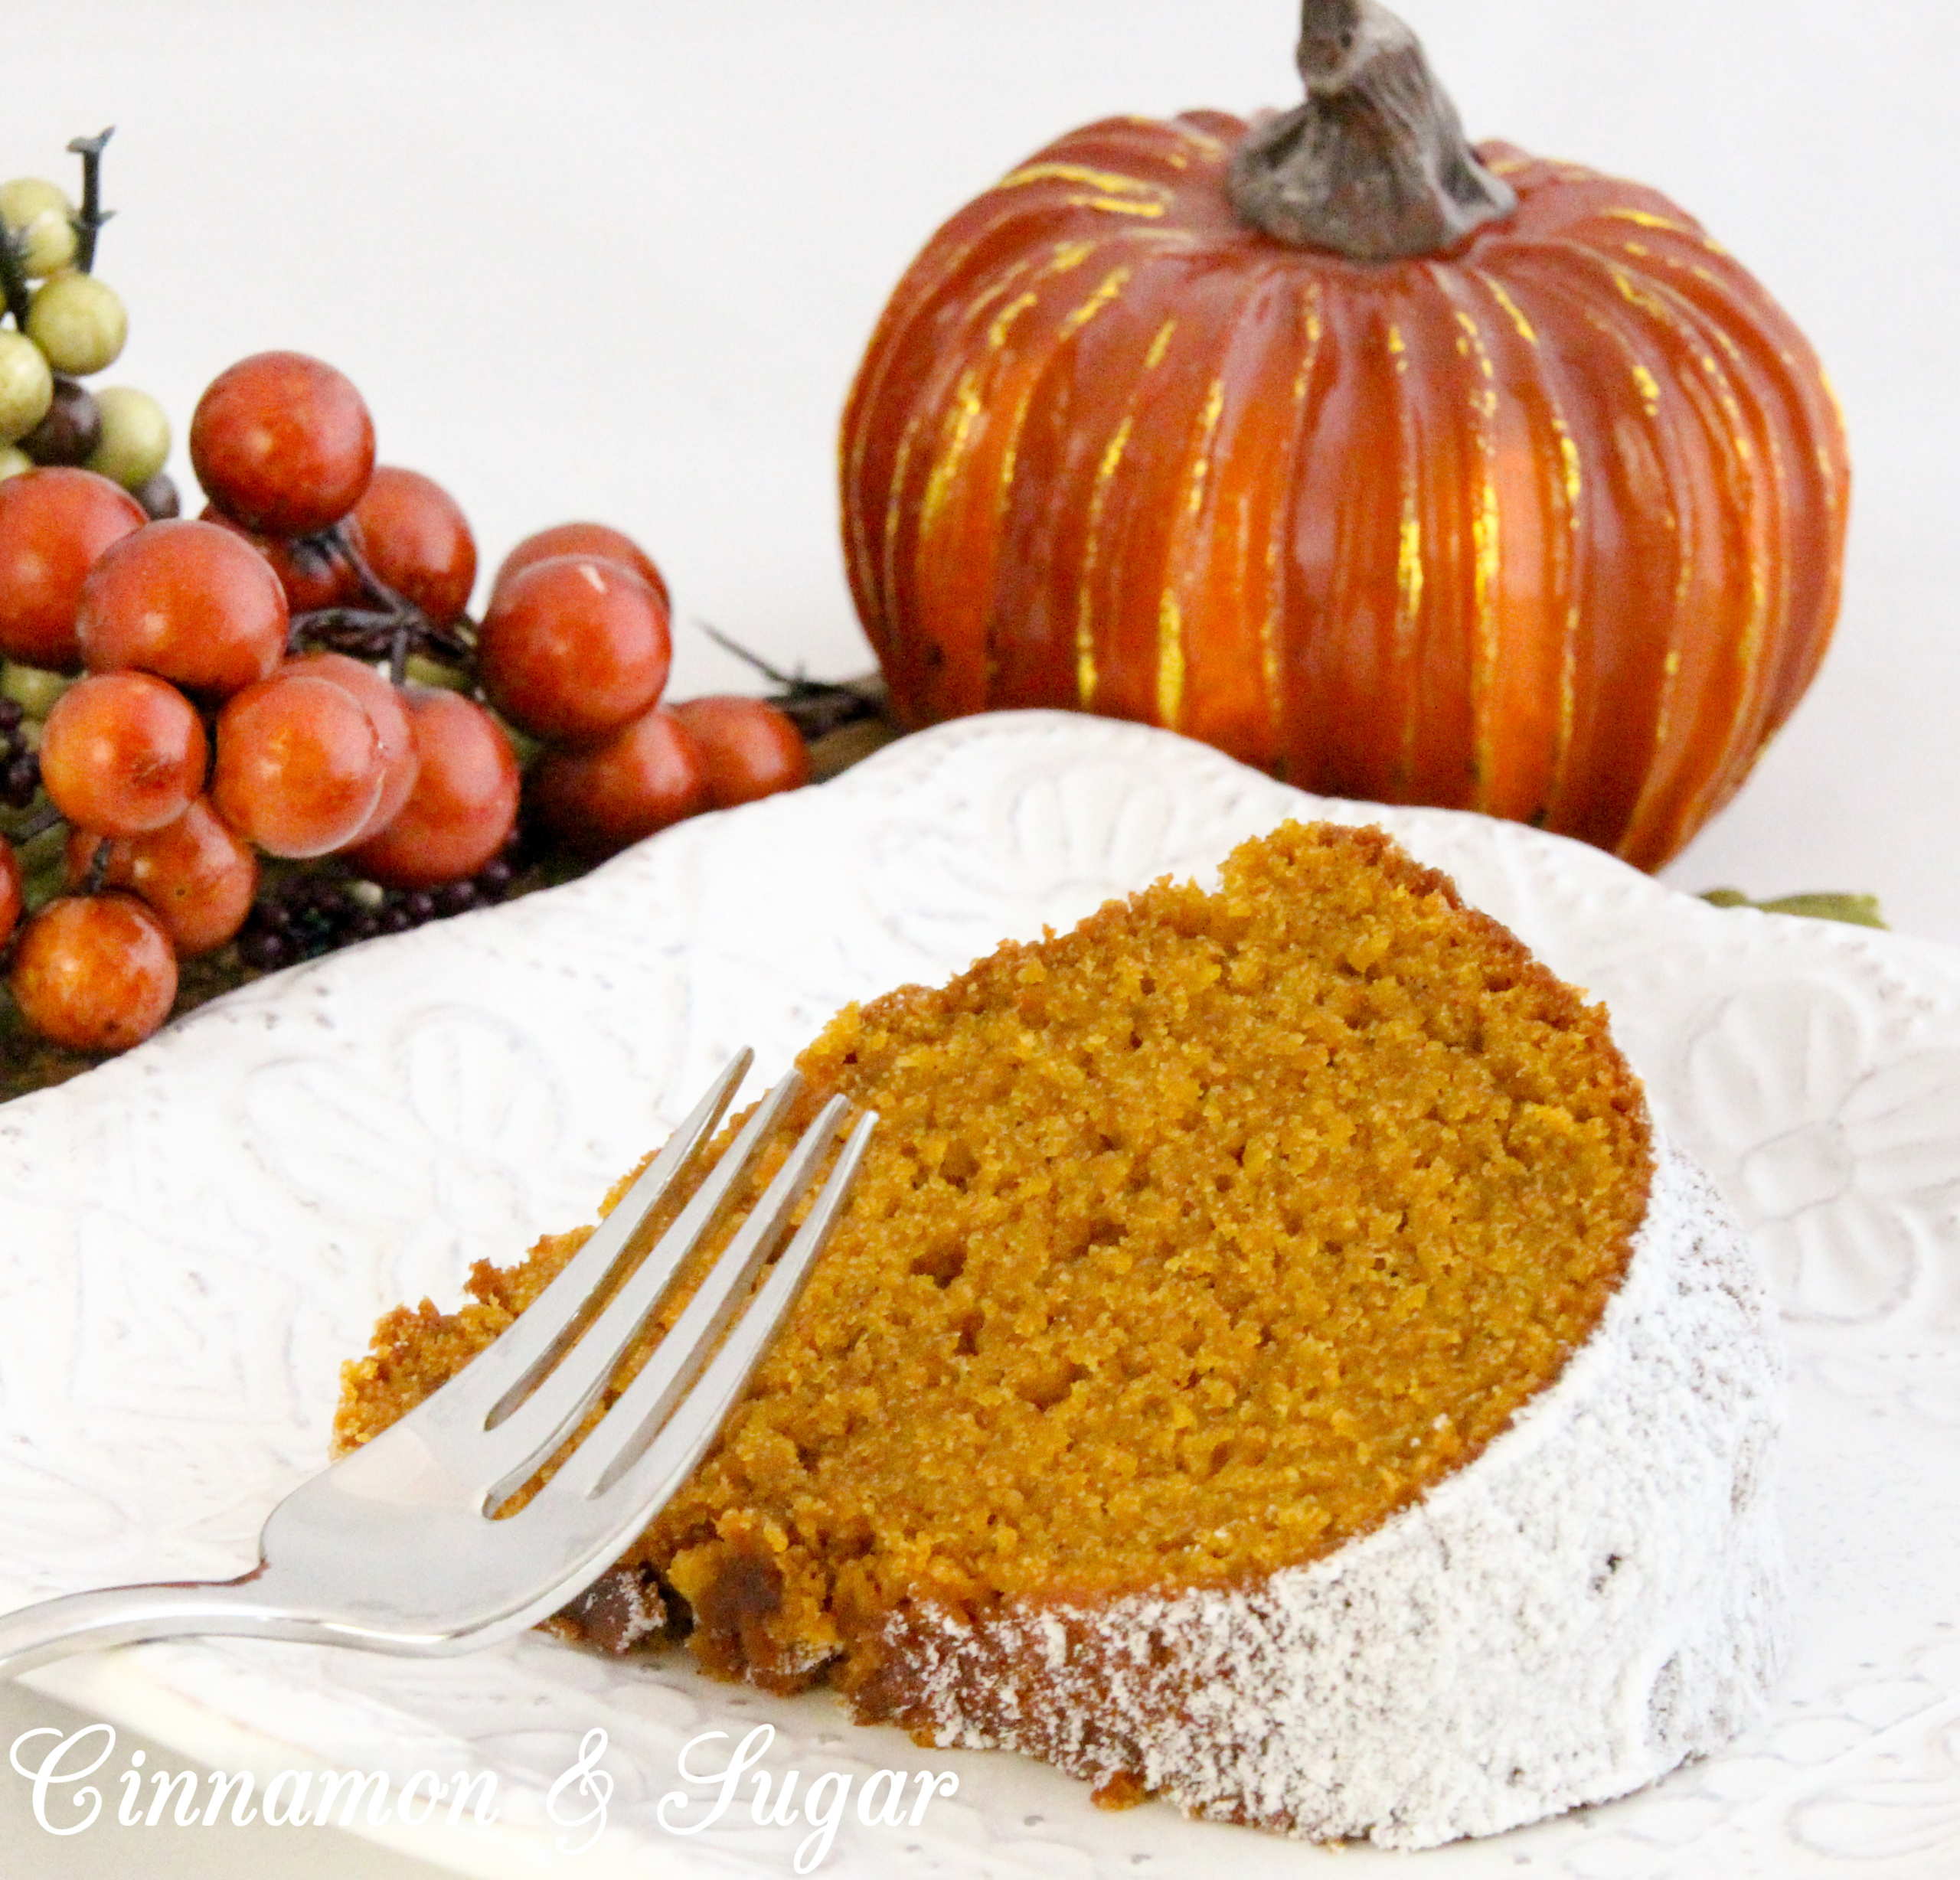 Grandma Peggy's Pumpkin Bundt Cake uses three cups of pumpkin which makes this cake super moist! The pumpkin flavor shines through and enhances the generous use of warm spices. Recipe shared with permission granted by Krista Davis, author of THE DIVA SPICES IT UP.